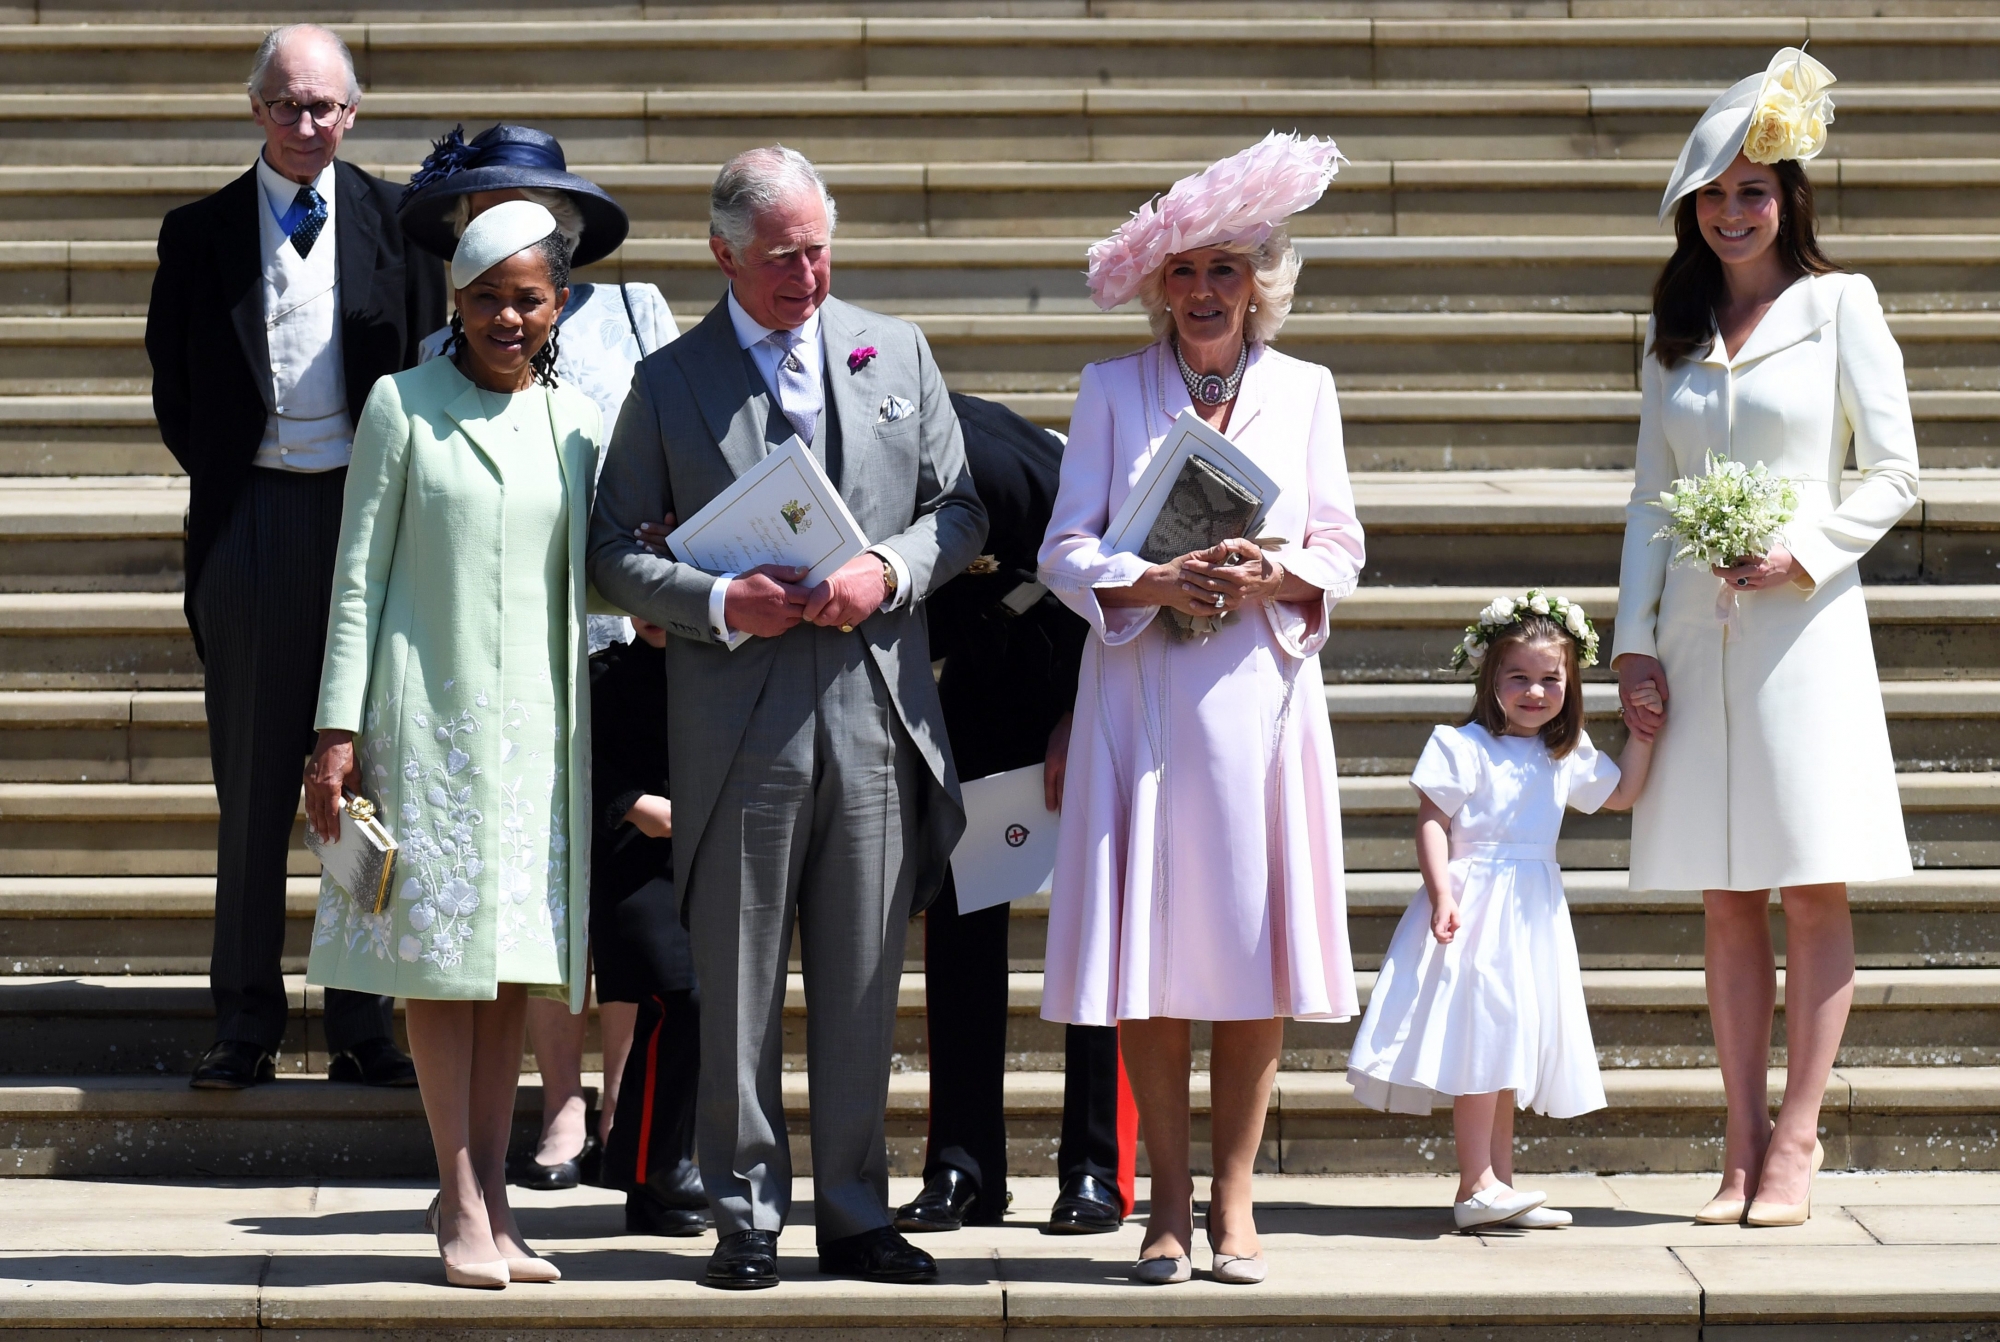 epa06749751 Meghan's mother Doria Ragland (L), Britain's Prince Charles (2-L), Camilla (C) the Duchess of Cornwall, Catherine (R), Duchess of Cambridge and Princess Charlotte (2-R) leave St George's Chapel in Windsor Castle after the royal wedding ceremony of Prince Harry, Duke of Sussex and Meghan, Duchess of Sussex in Windsor, Britain, 19 May 2018. The couple have been bestowed the royal titles of Duke and Duchess of Sussex on them by the British monarch.  EPA/NEIL HALL / POOL